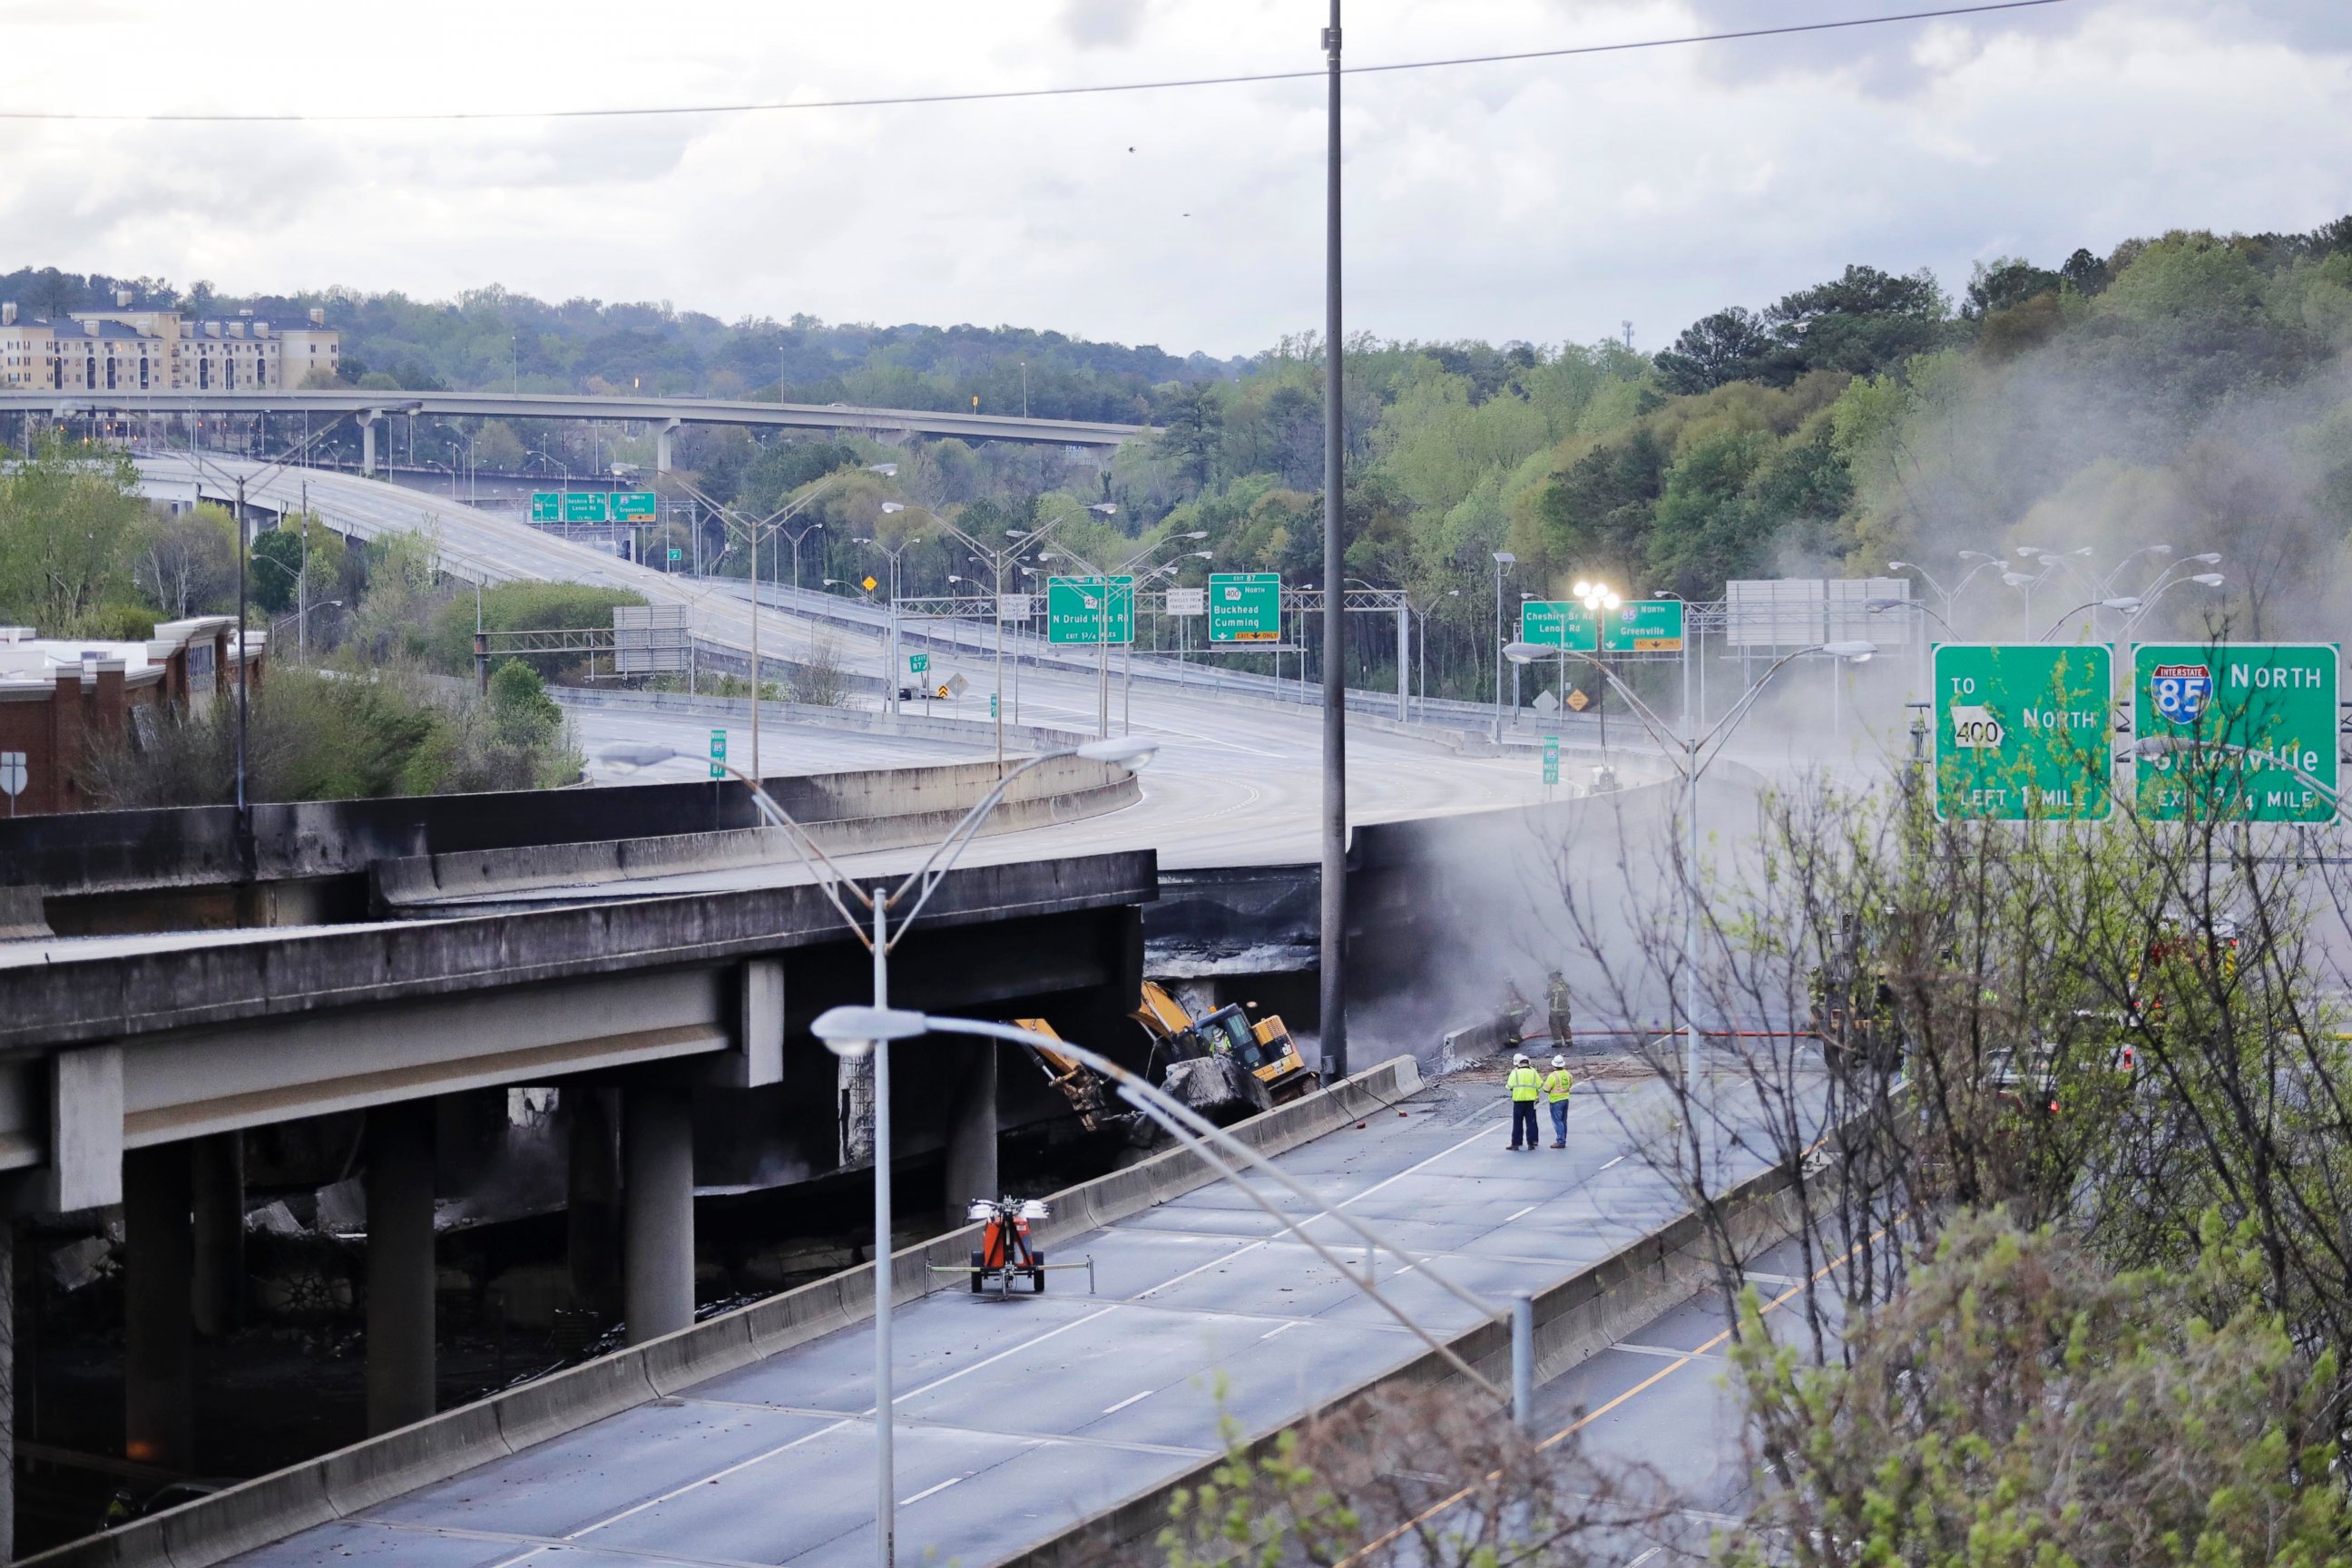 PHOTO: Crews work on a section of an overpass that collapsed from a large fire on Interstate 85 in Atlanta, March 31, 2017.